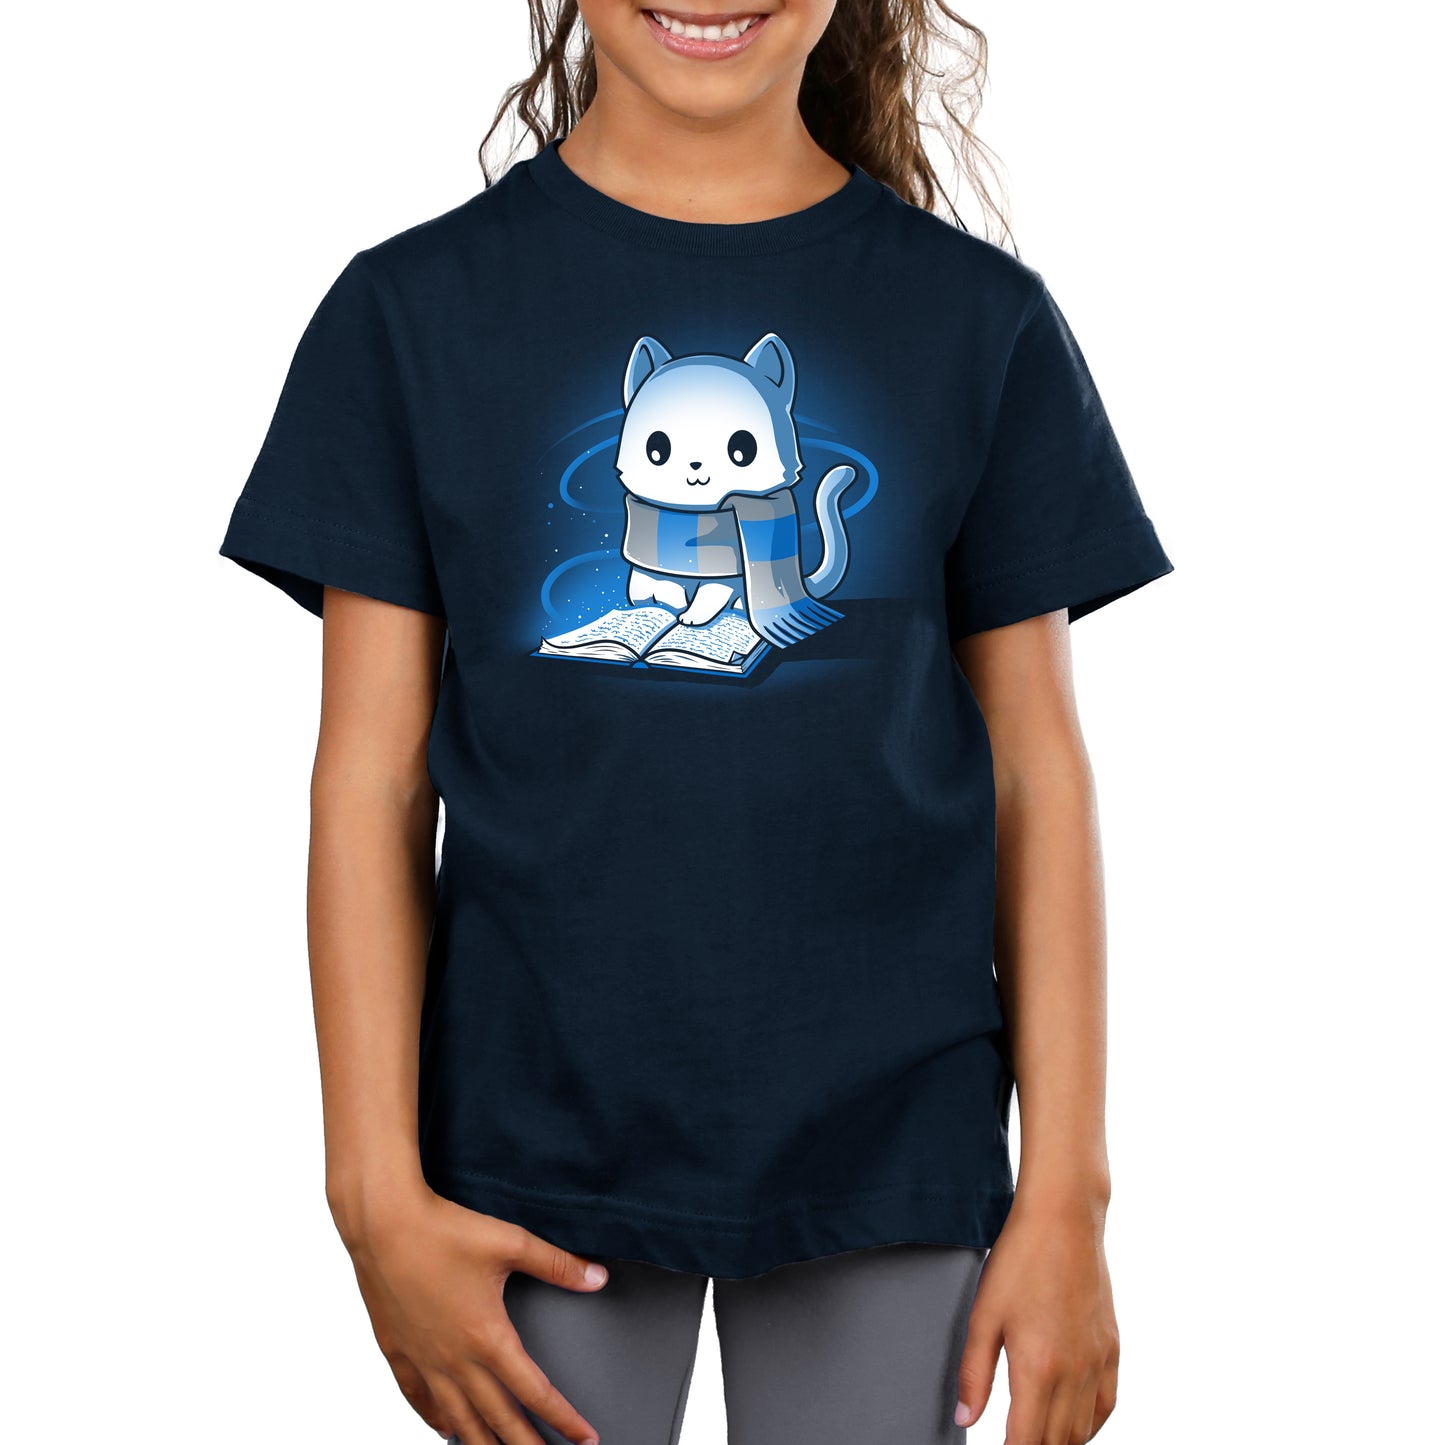 A girl wearing a tee with a Smart Kitty on it by TeeTurtle.